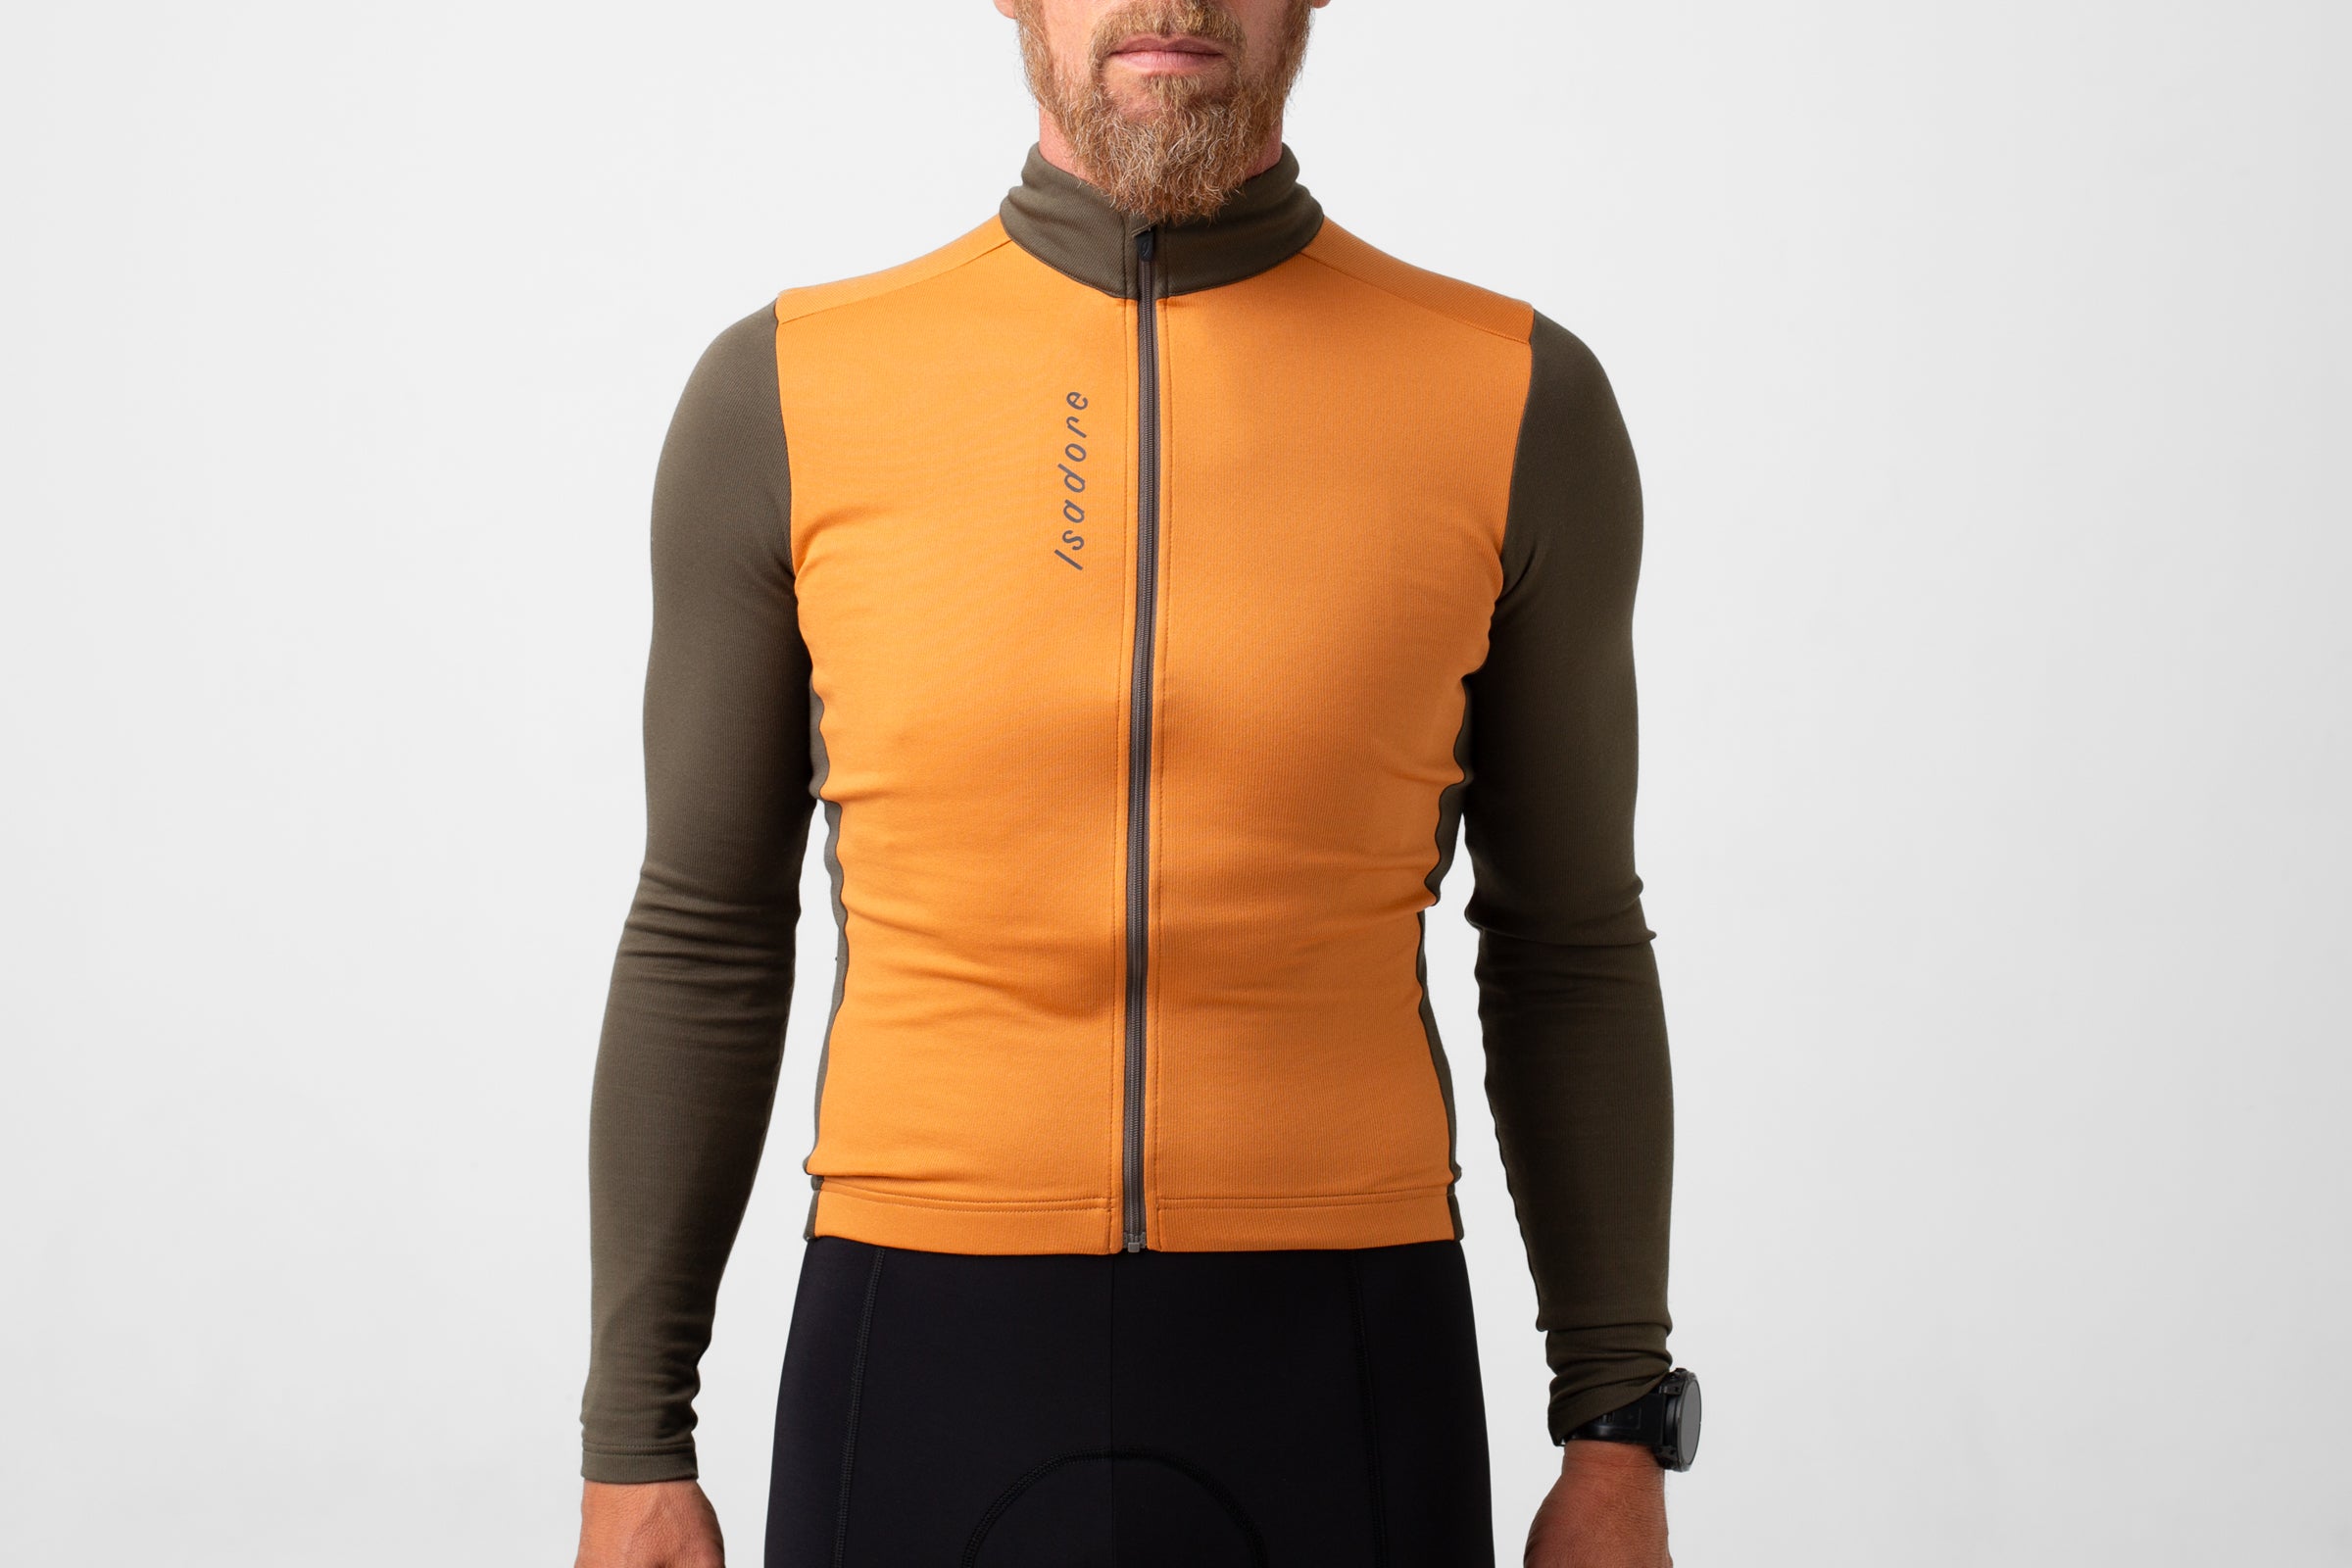 Patchwork Thermal Long Sleeve Jersey